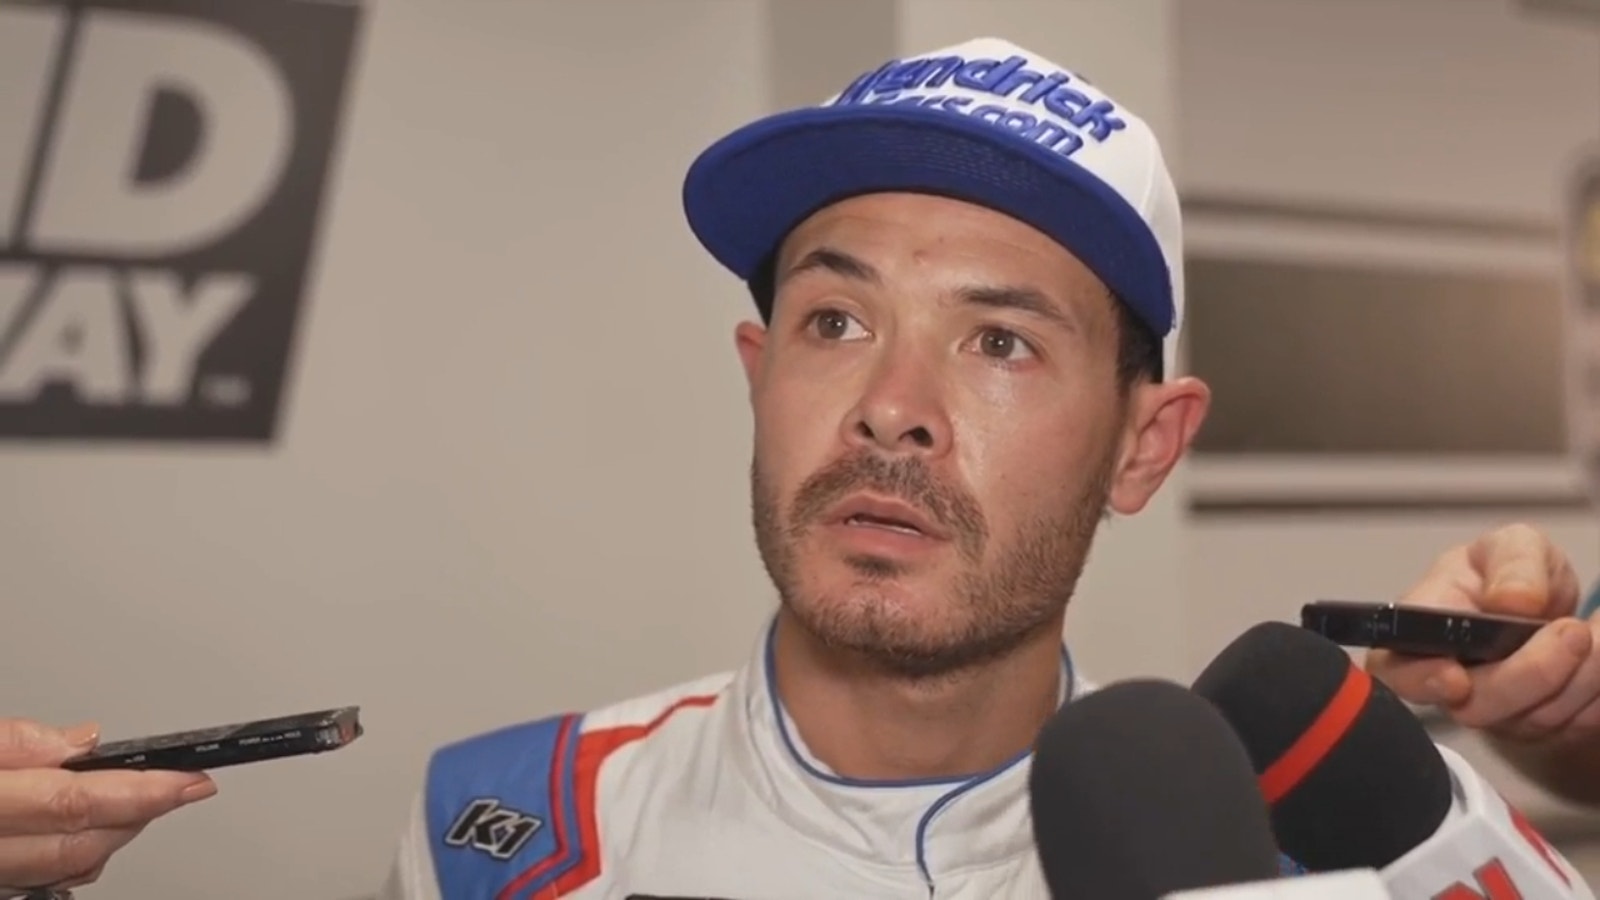 Kyle Larson on why he and Denny Hamlin haven't discussed Pocono finish